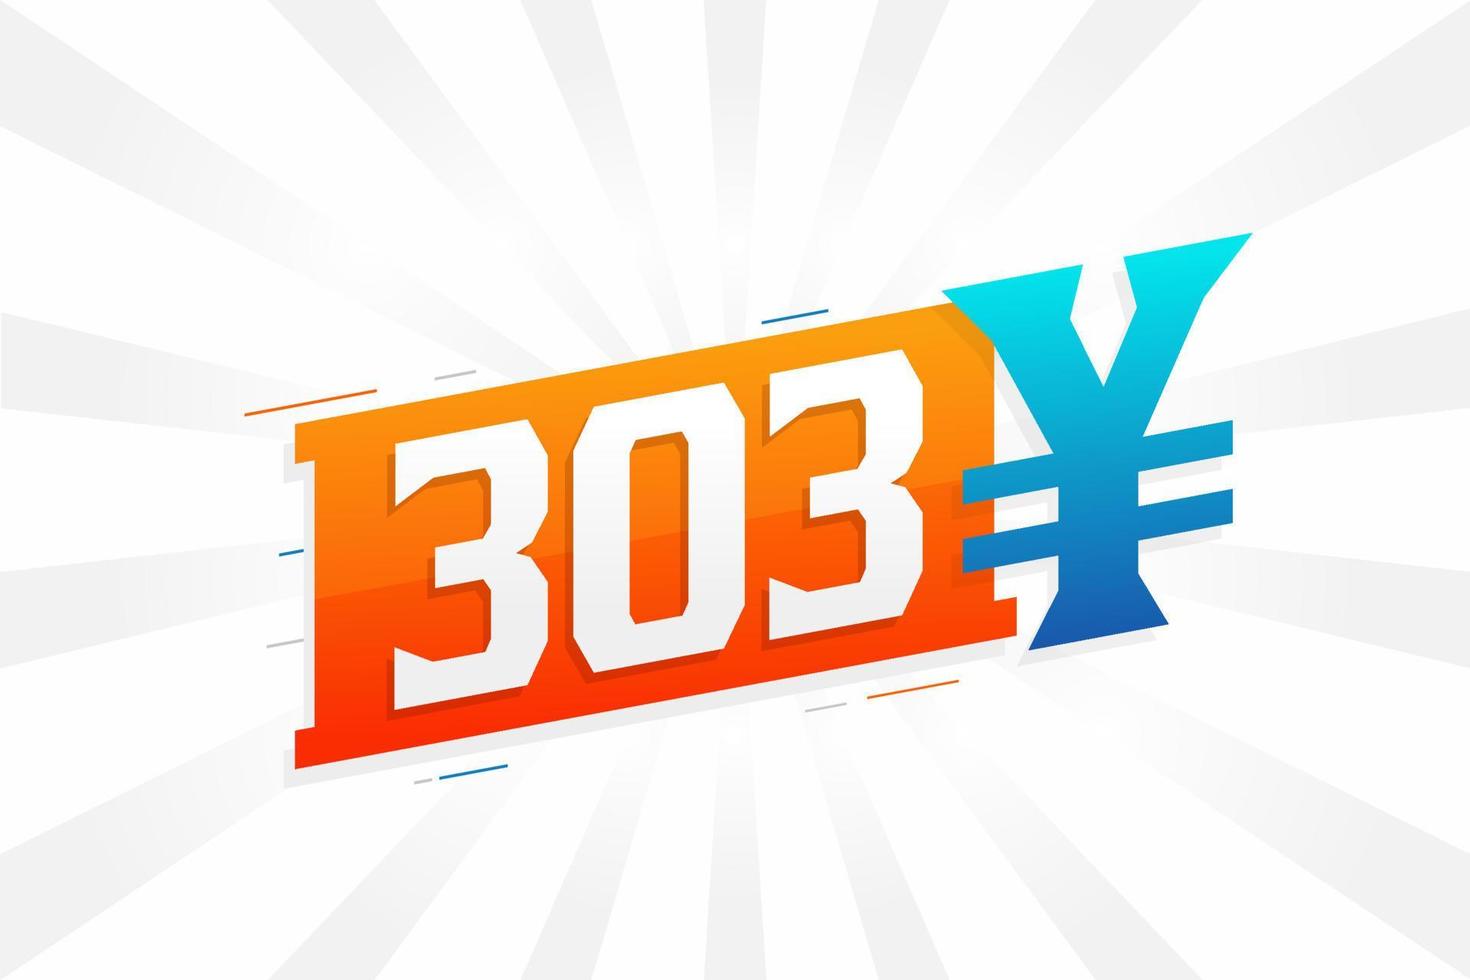 303 Yuan Chinese currency vector text symbol. 303 Yen Japanese currency Money stock vector